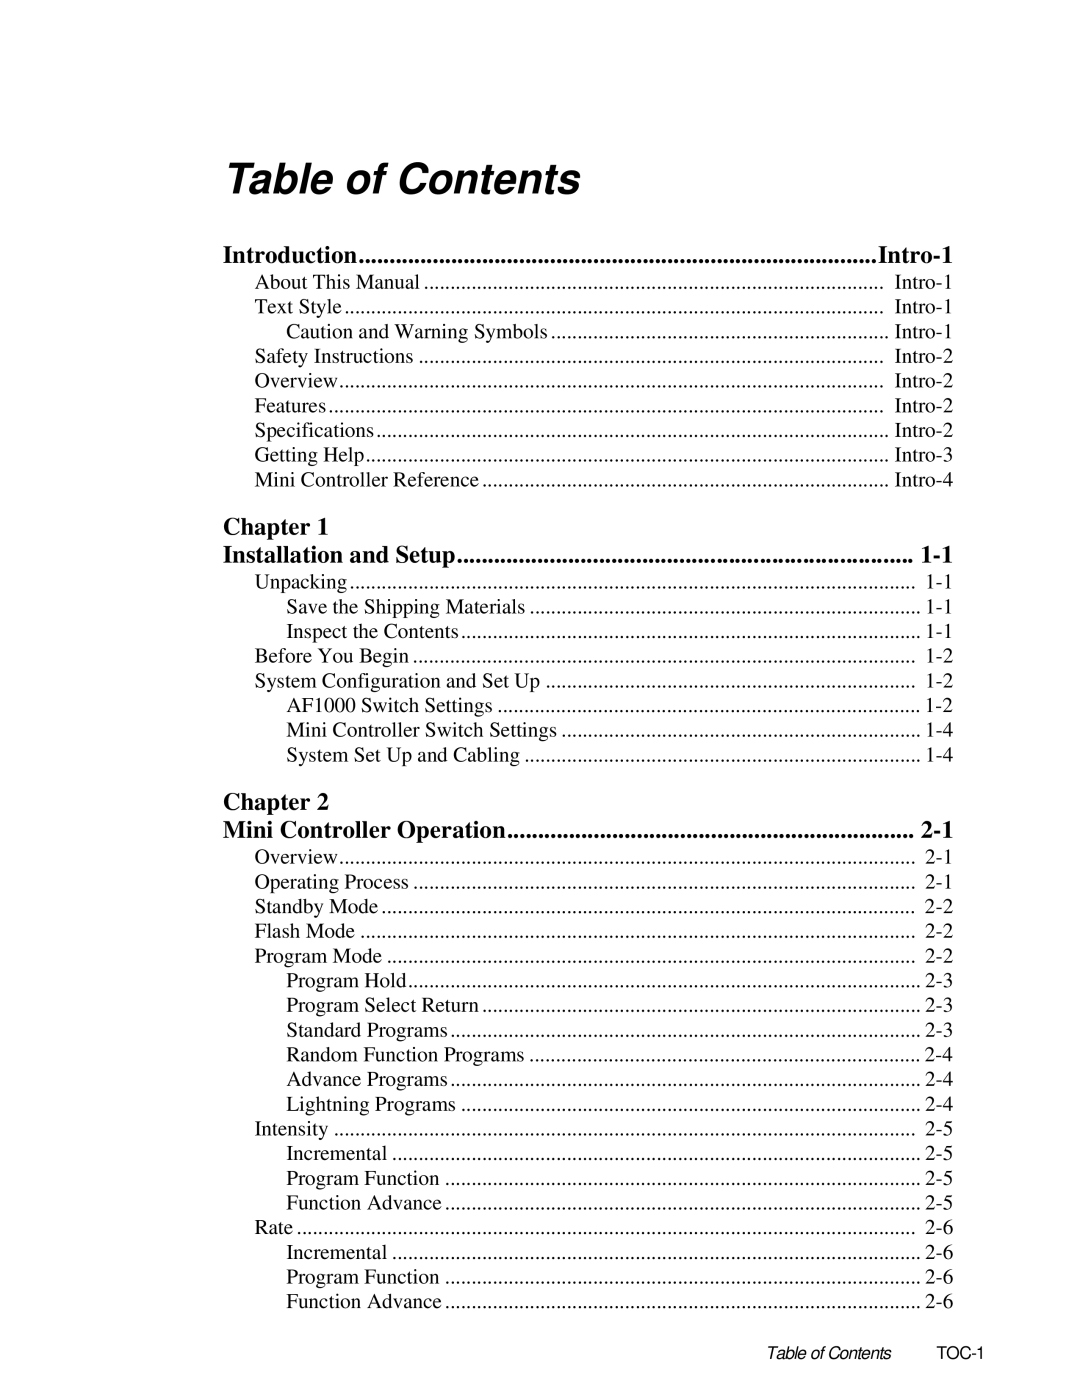 High End Systems AF1000 user manual Table of Contents, Intro-1, Chapter, Introduction, Installation and Setup 